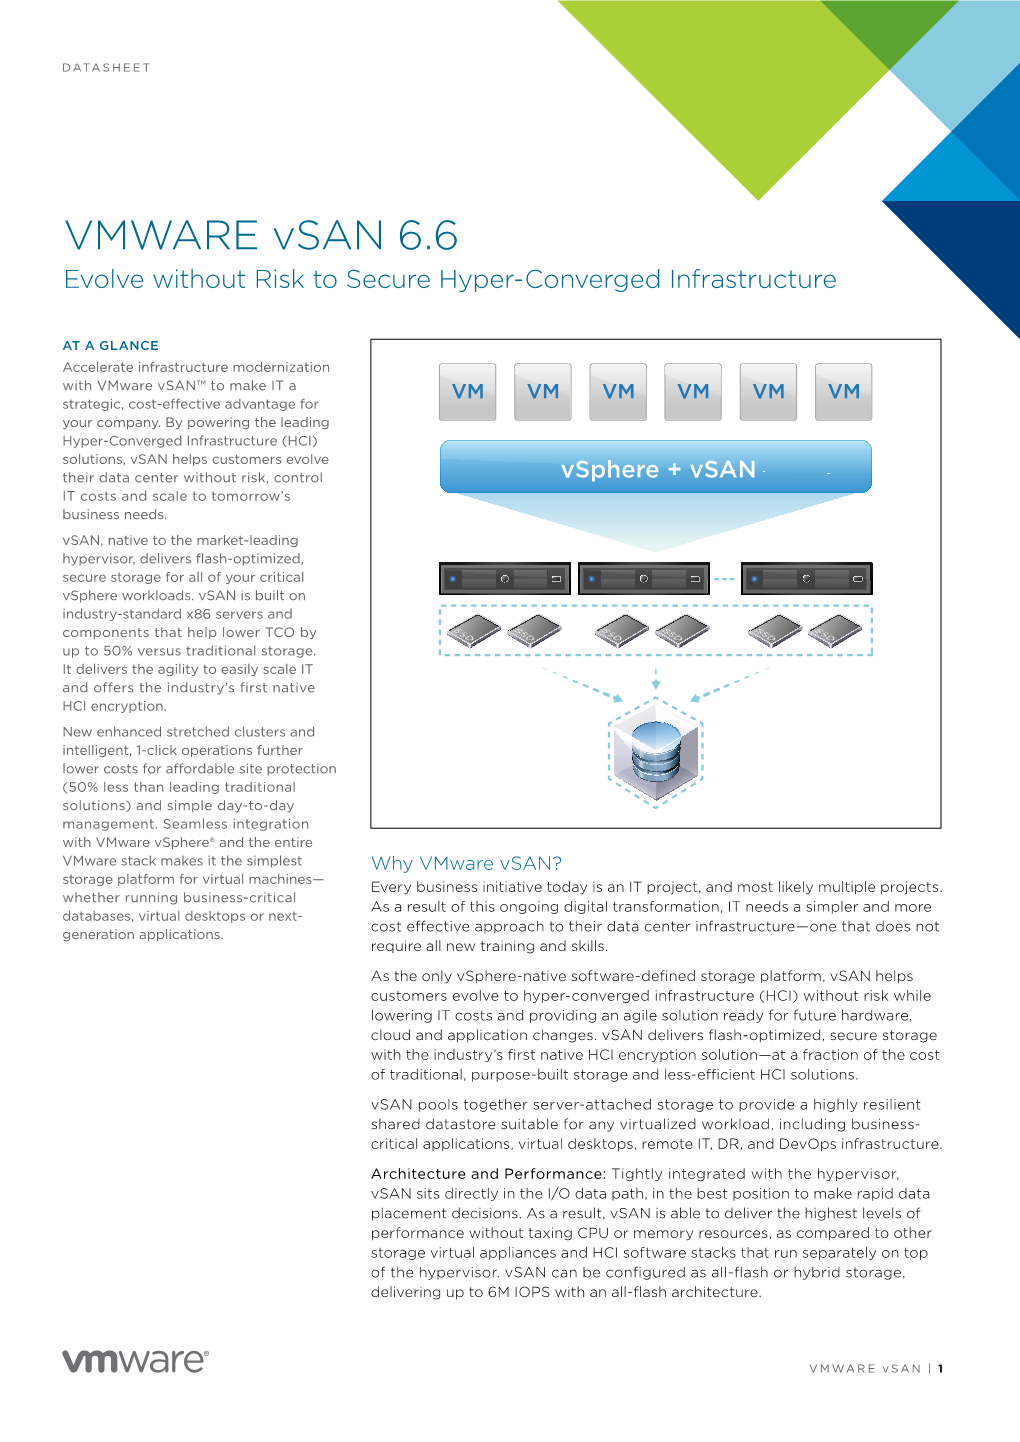 VMWARE Vsan 6.6 Evolve Without Risk to Secure Hyper-Converged Infrastructure